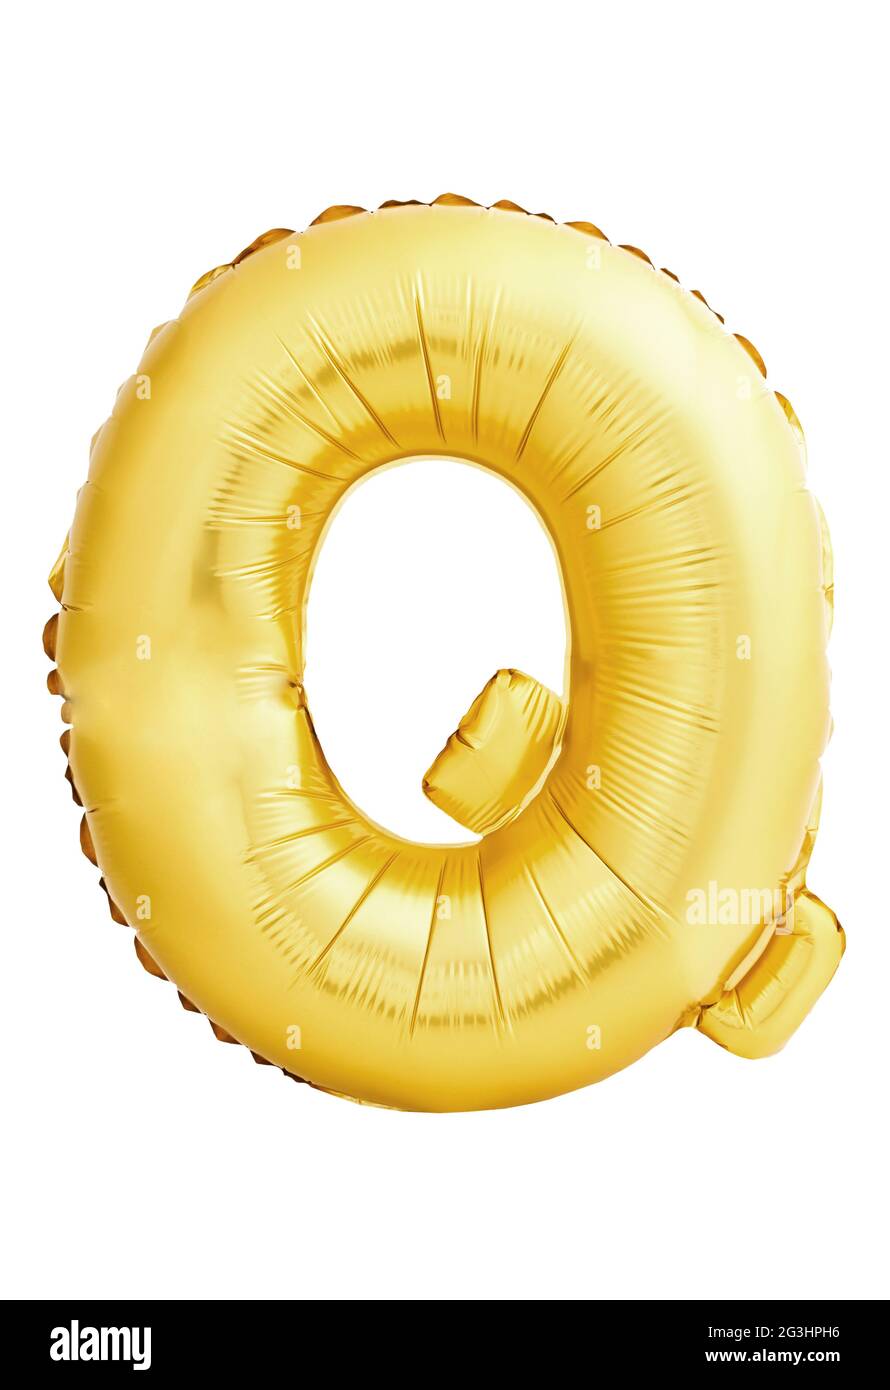 Letter Q made of inflatable balloon isolated on white background Stock Photo